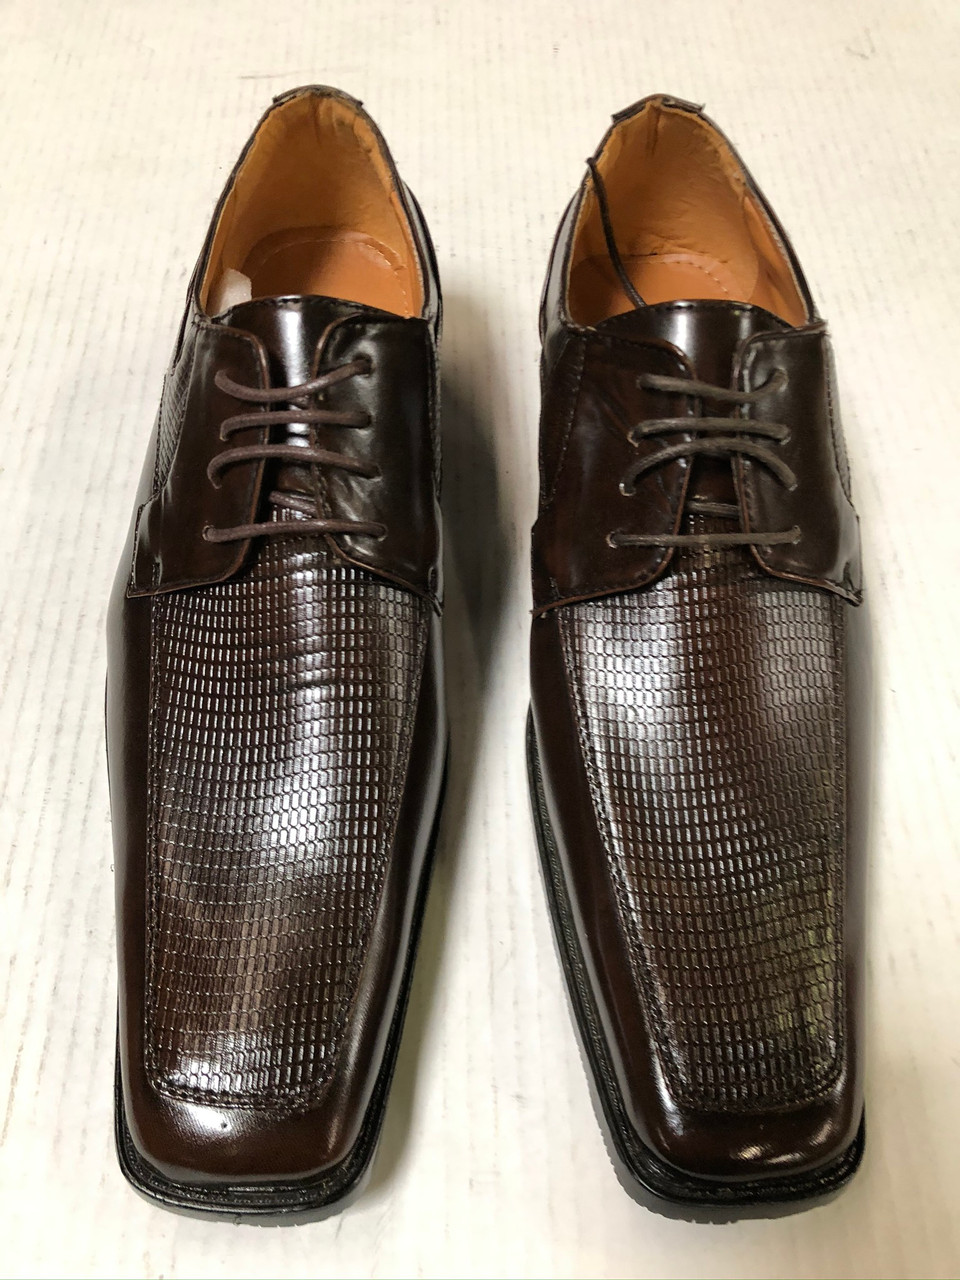 exotic dress shoes